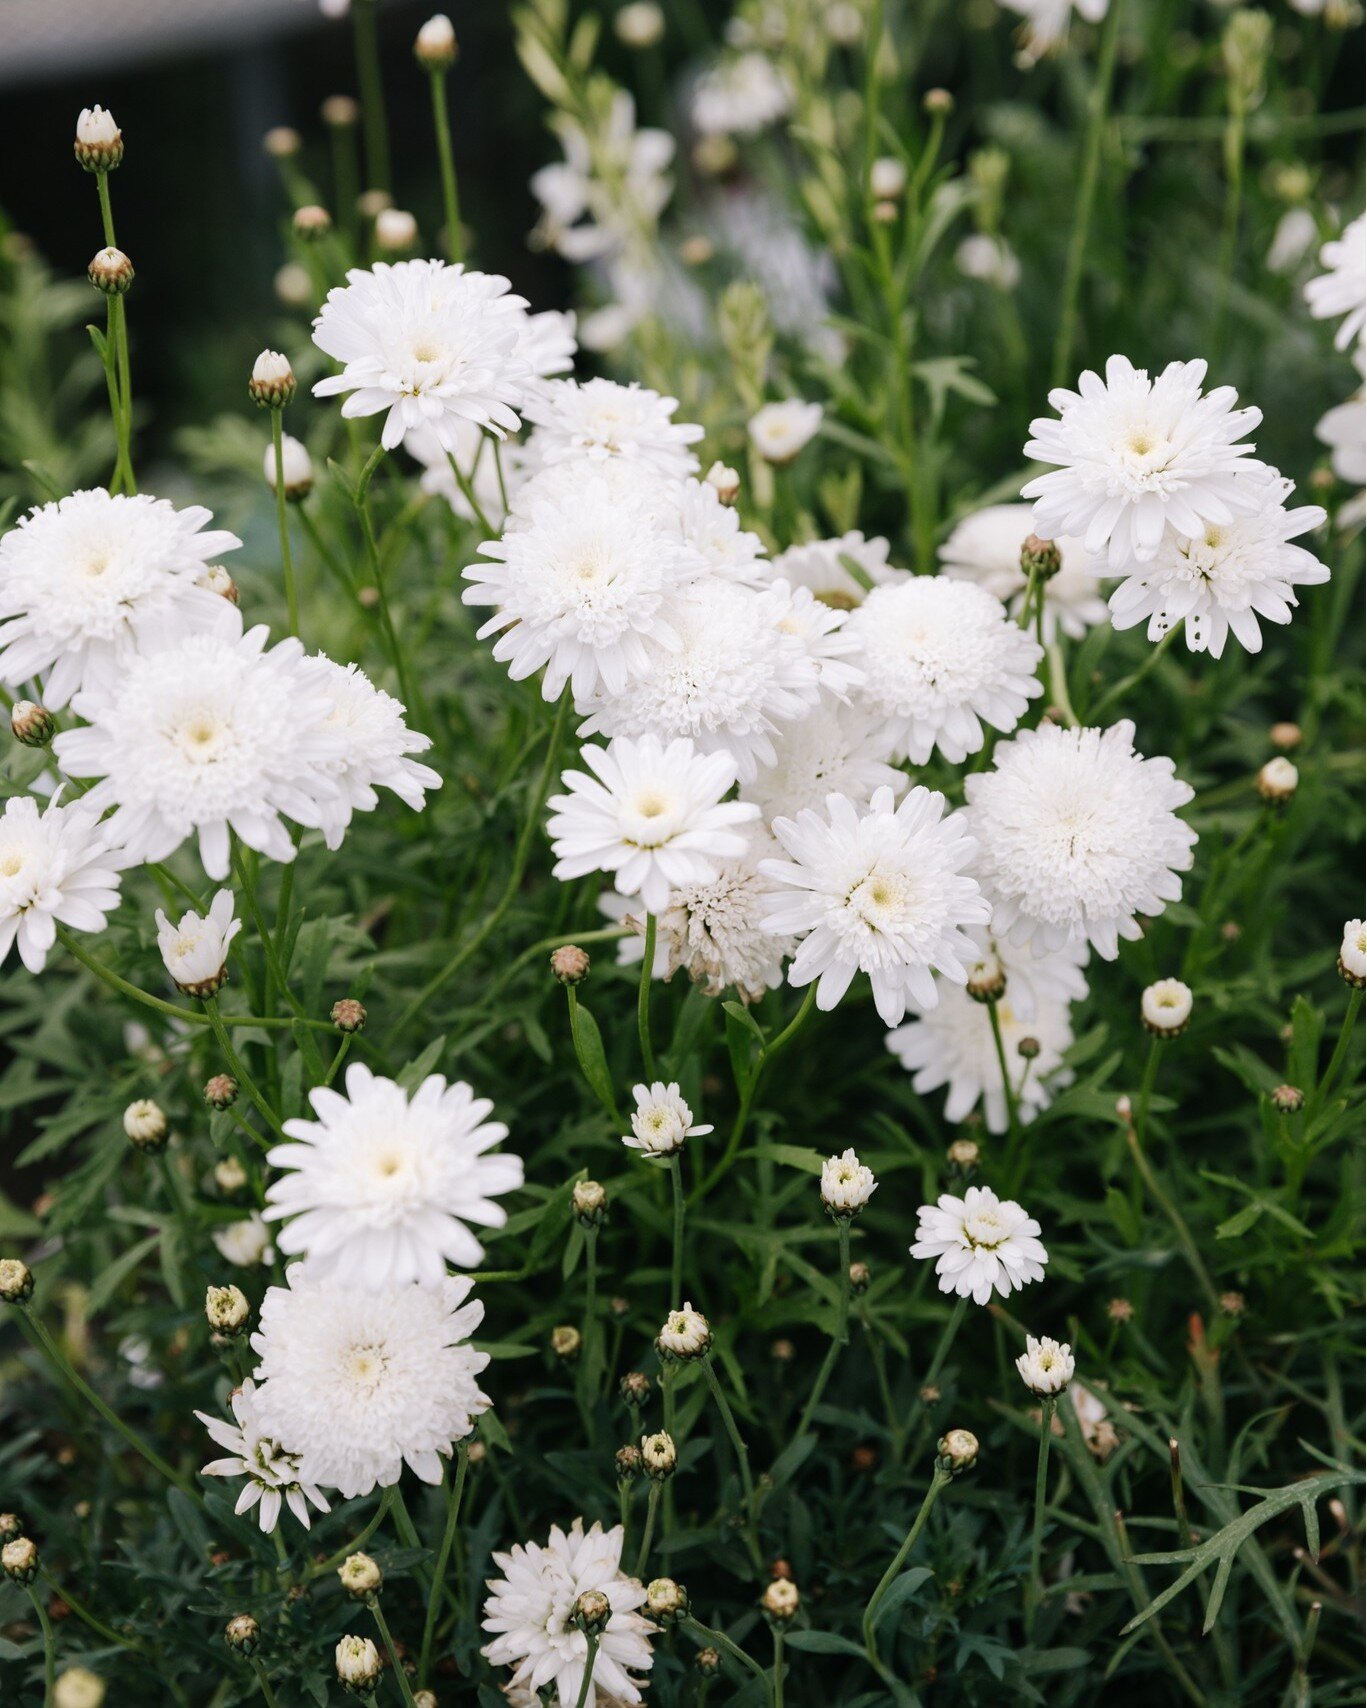 Another day, another Daisy!

This time we've got Federation Daisies - which are in store at the moment and just gorgeous! White, pink or coral - whatever takes your fancy. Long flowering and prolific. A fabulous perennial for a garden border and grea